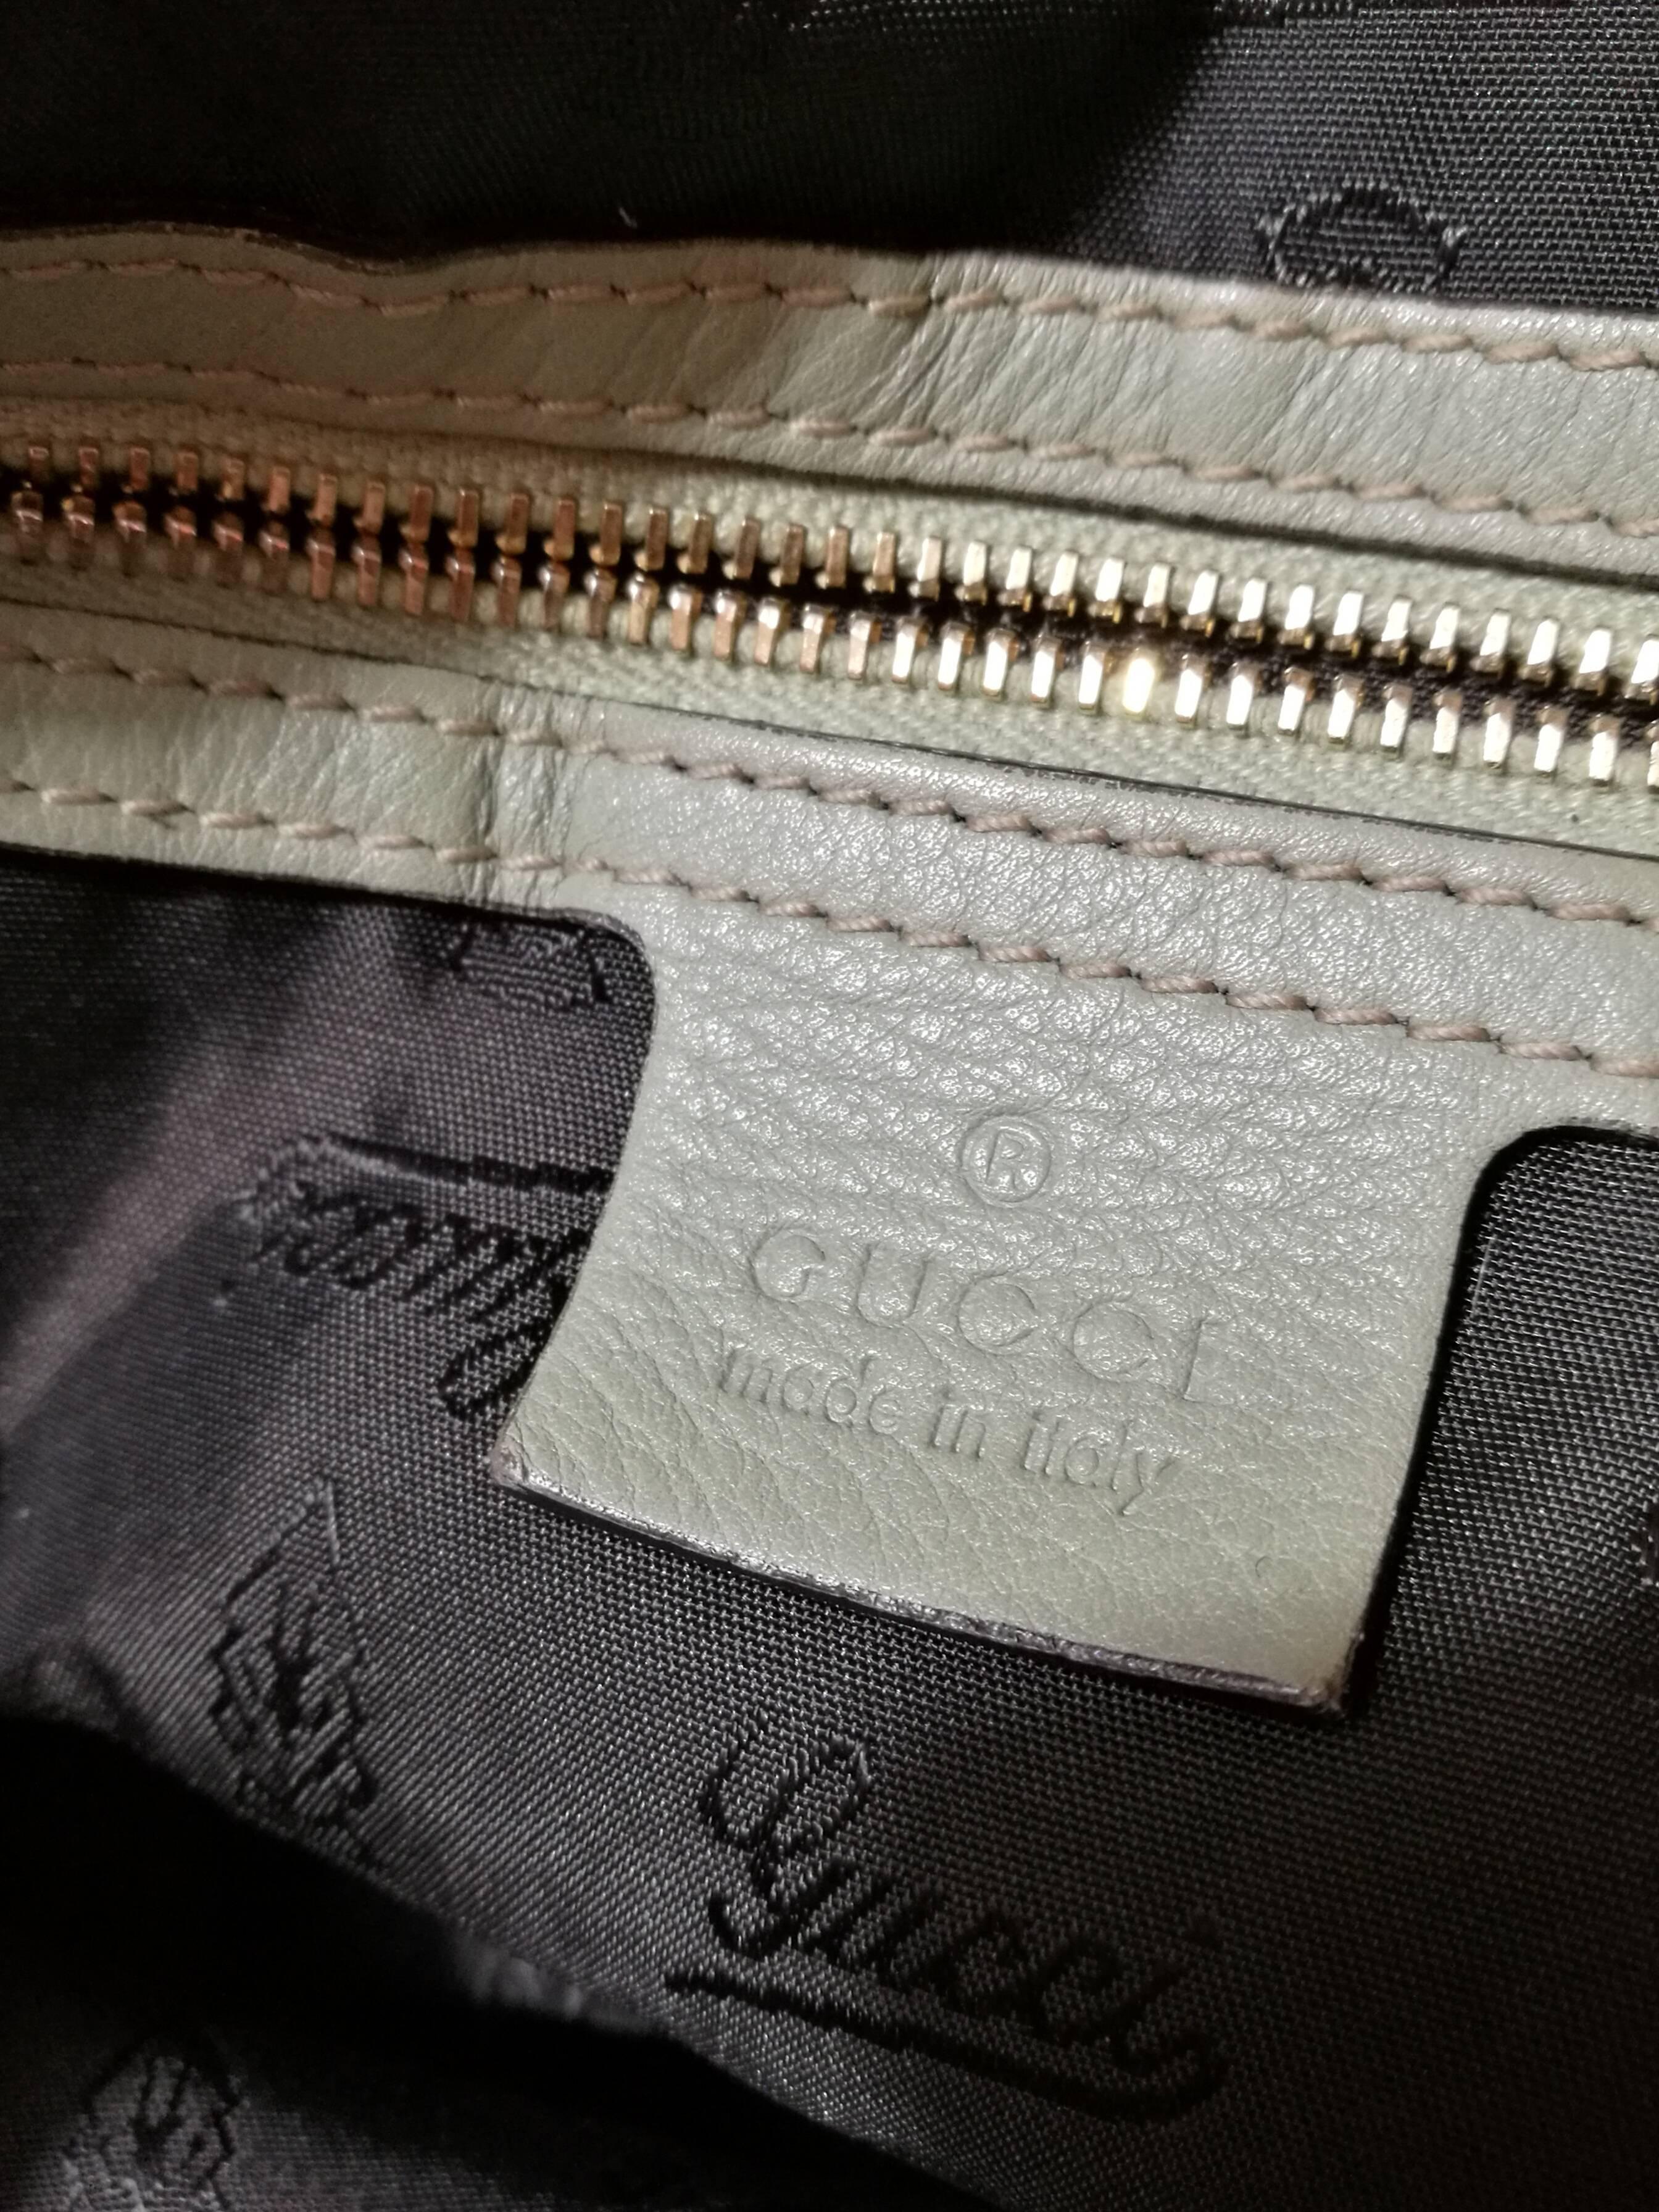 Gucci Green nude tone Python Skin Shoulder Bag
Gold tone G logo 
Totally made in italy

total  handle lenght 33 cm 